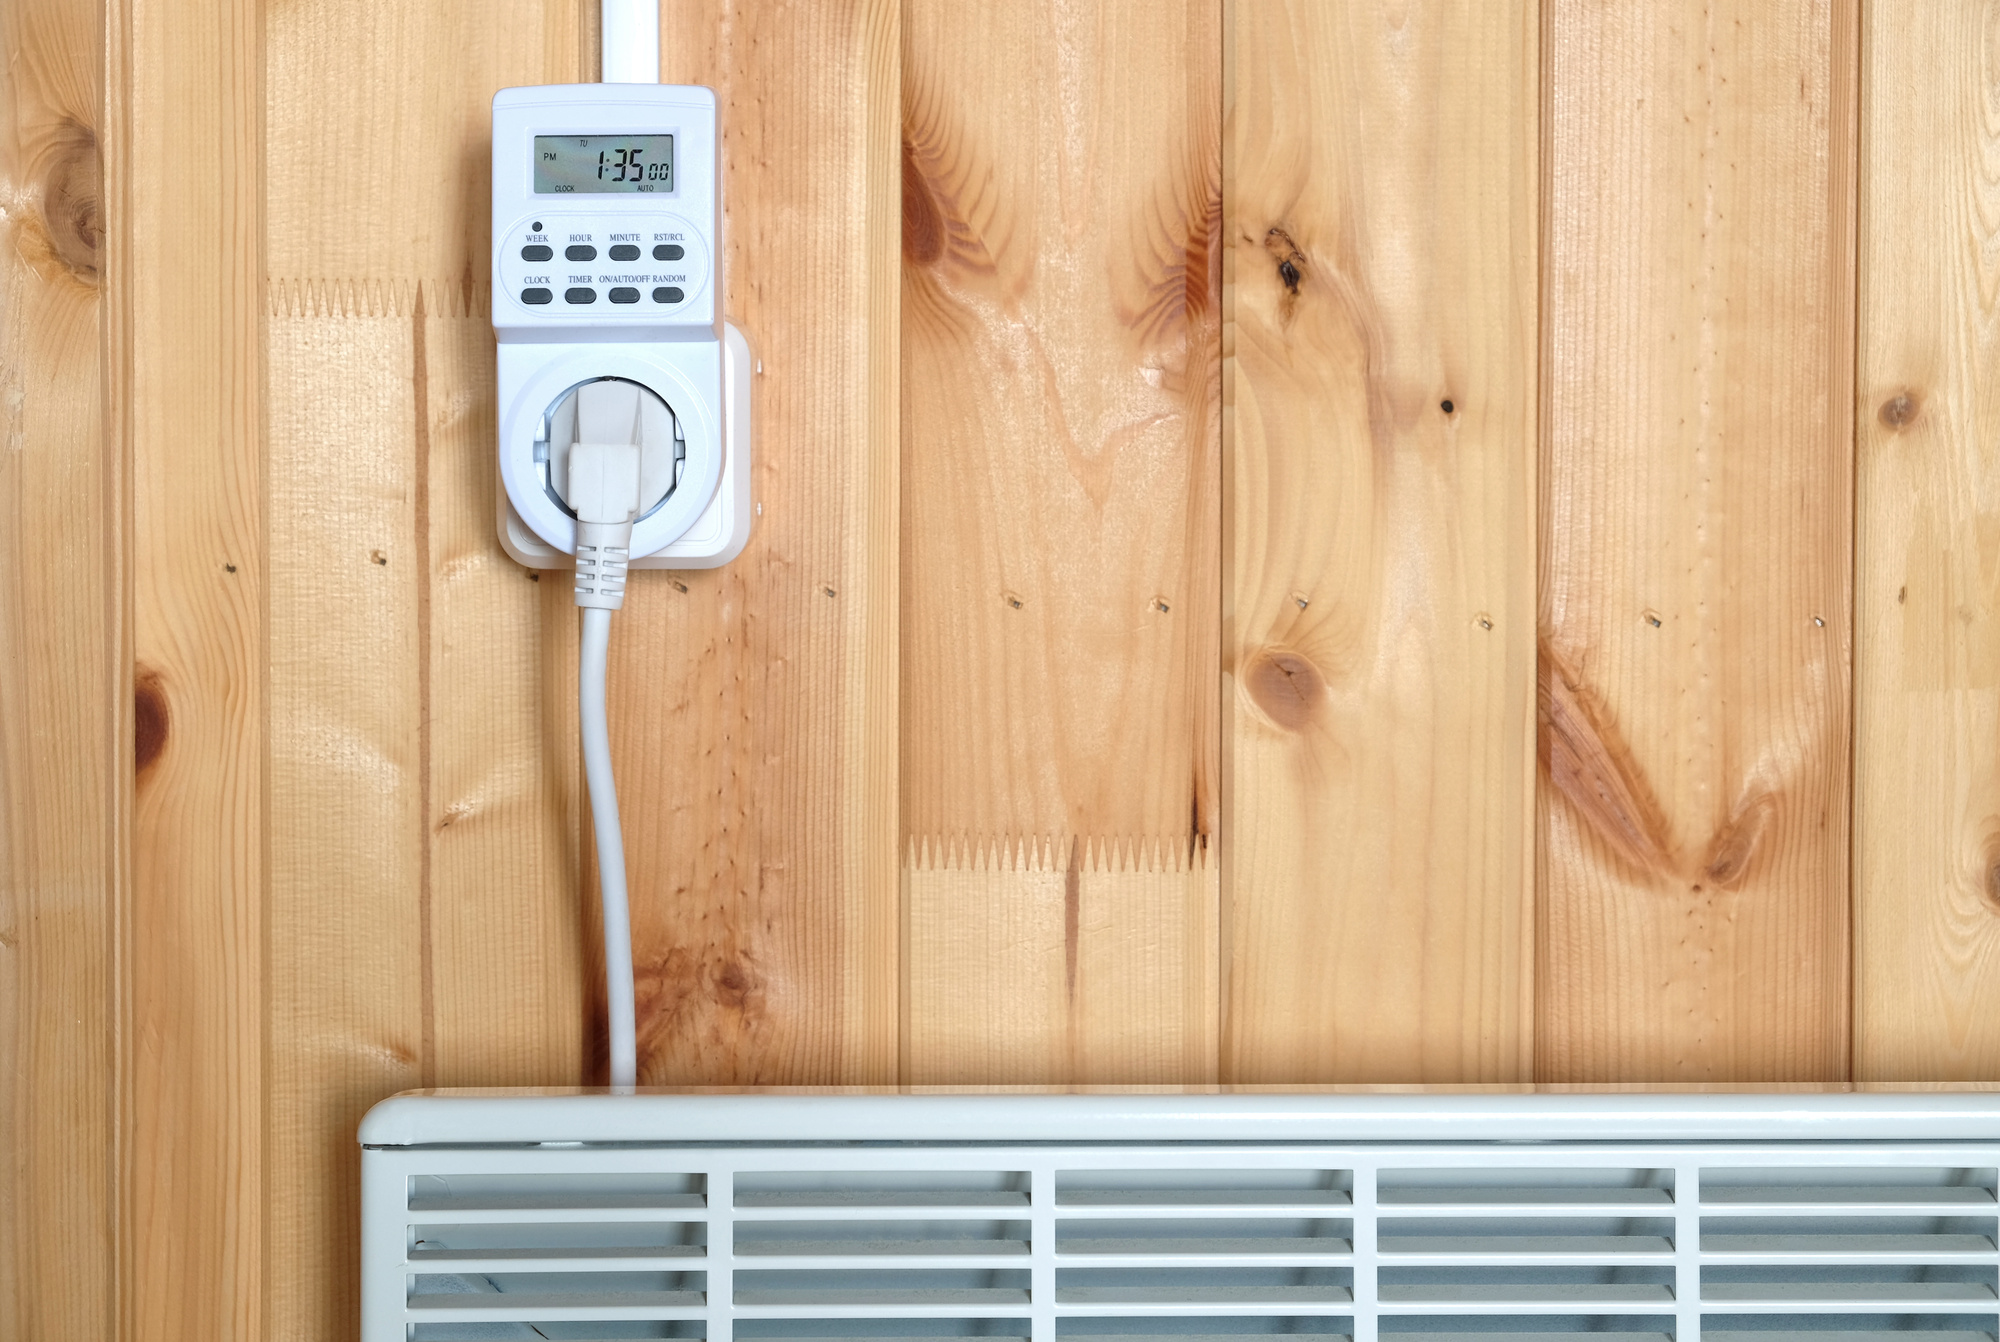 When it comes to finding the most effective and economical way to heat your home in the winter, explore these home heating solutions.